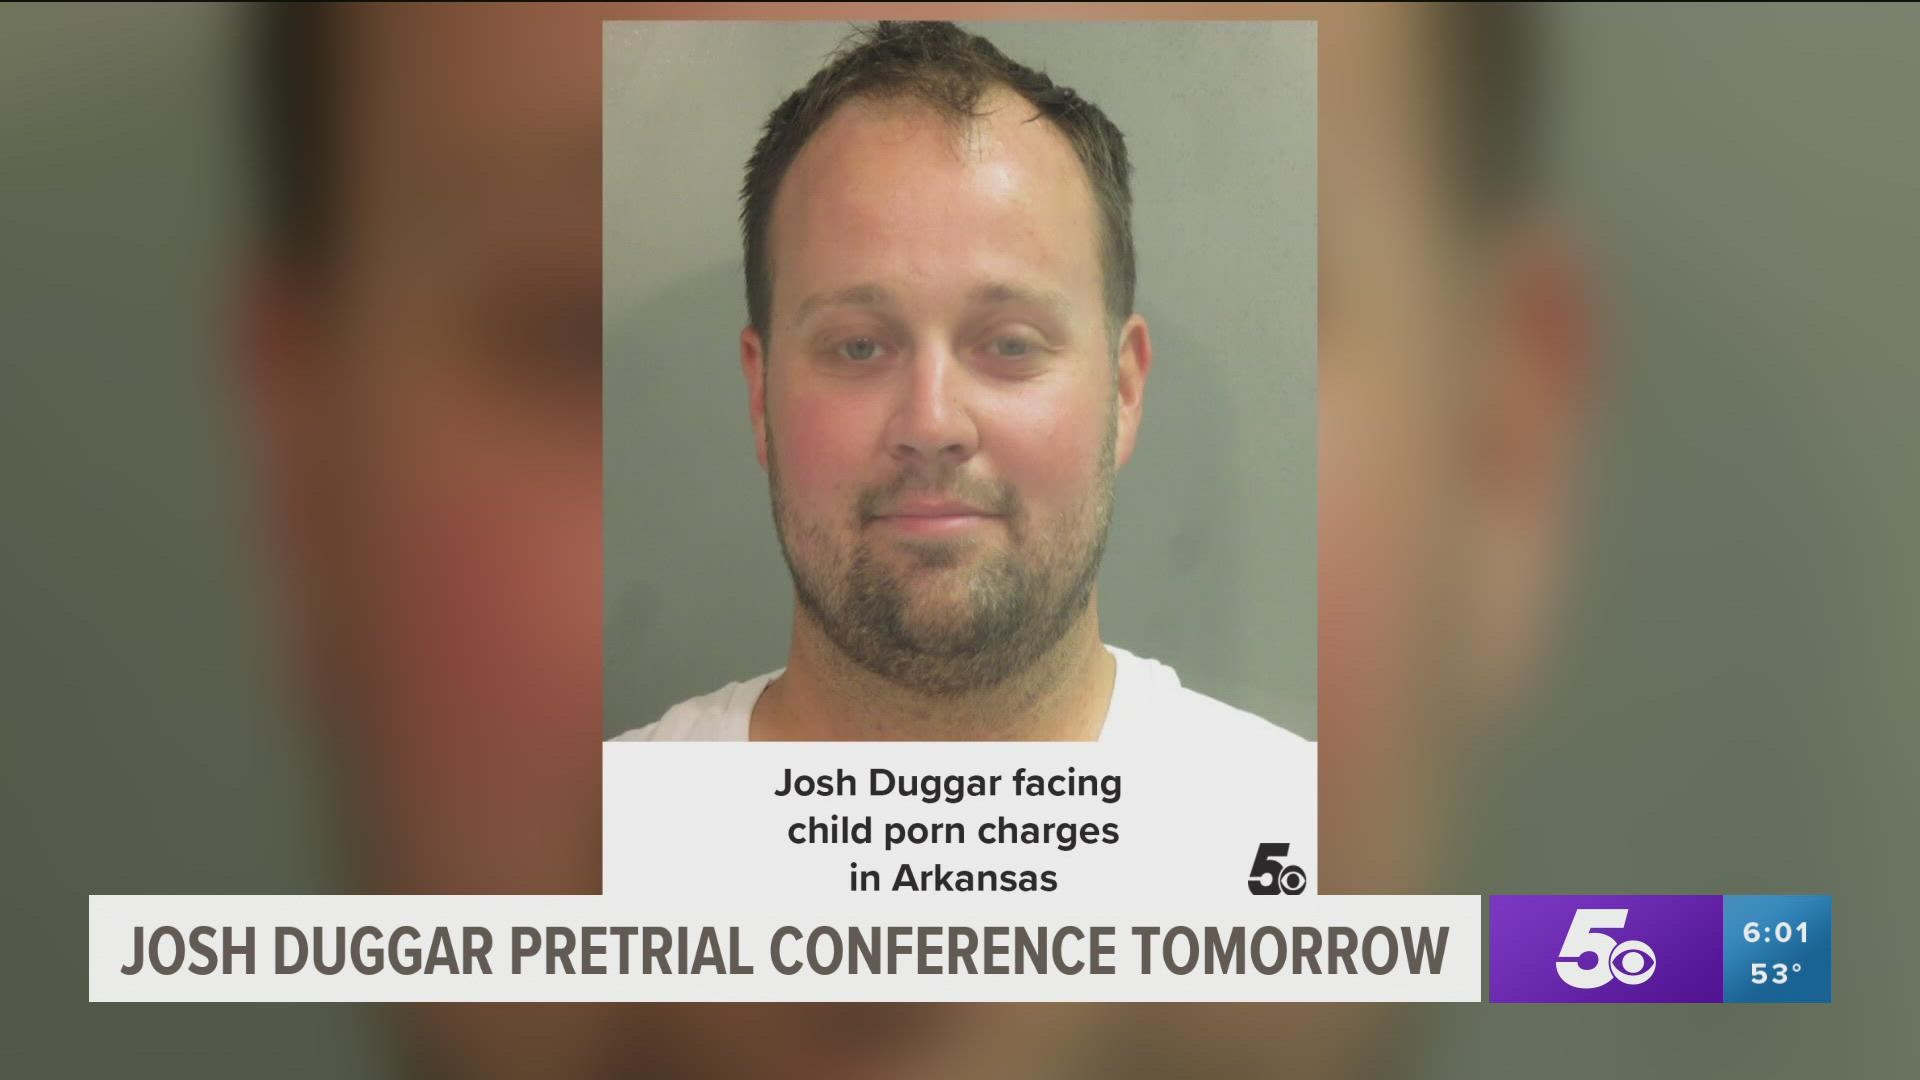 Josh Duggar is facing two counts of downloading and possessing child pornography.